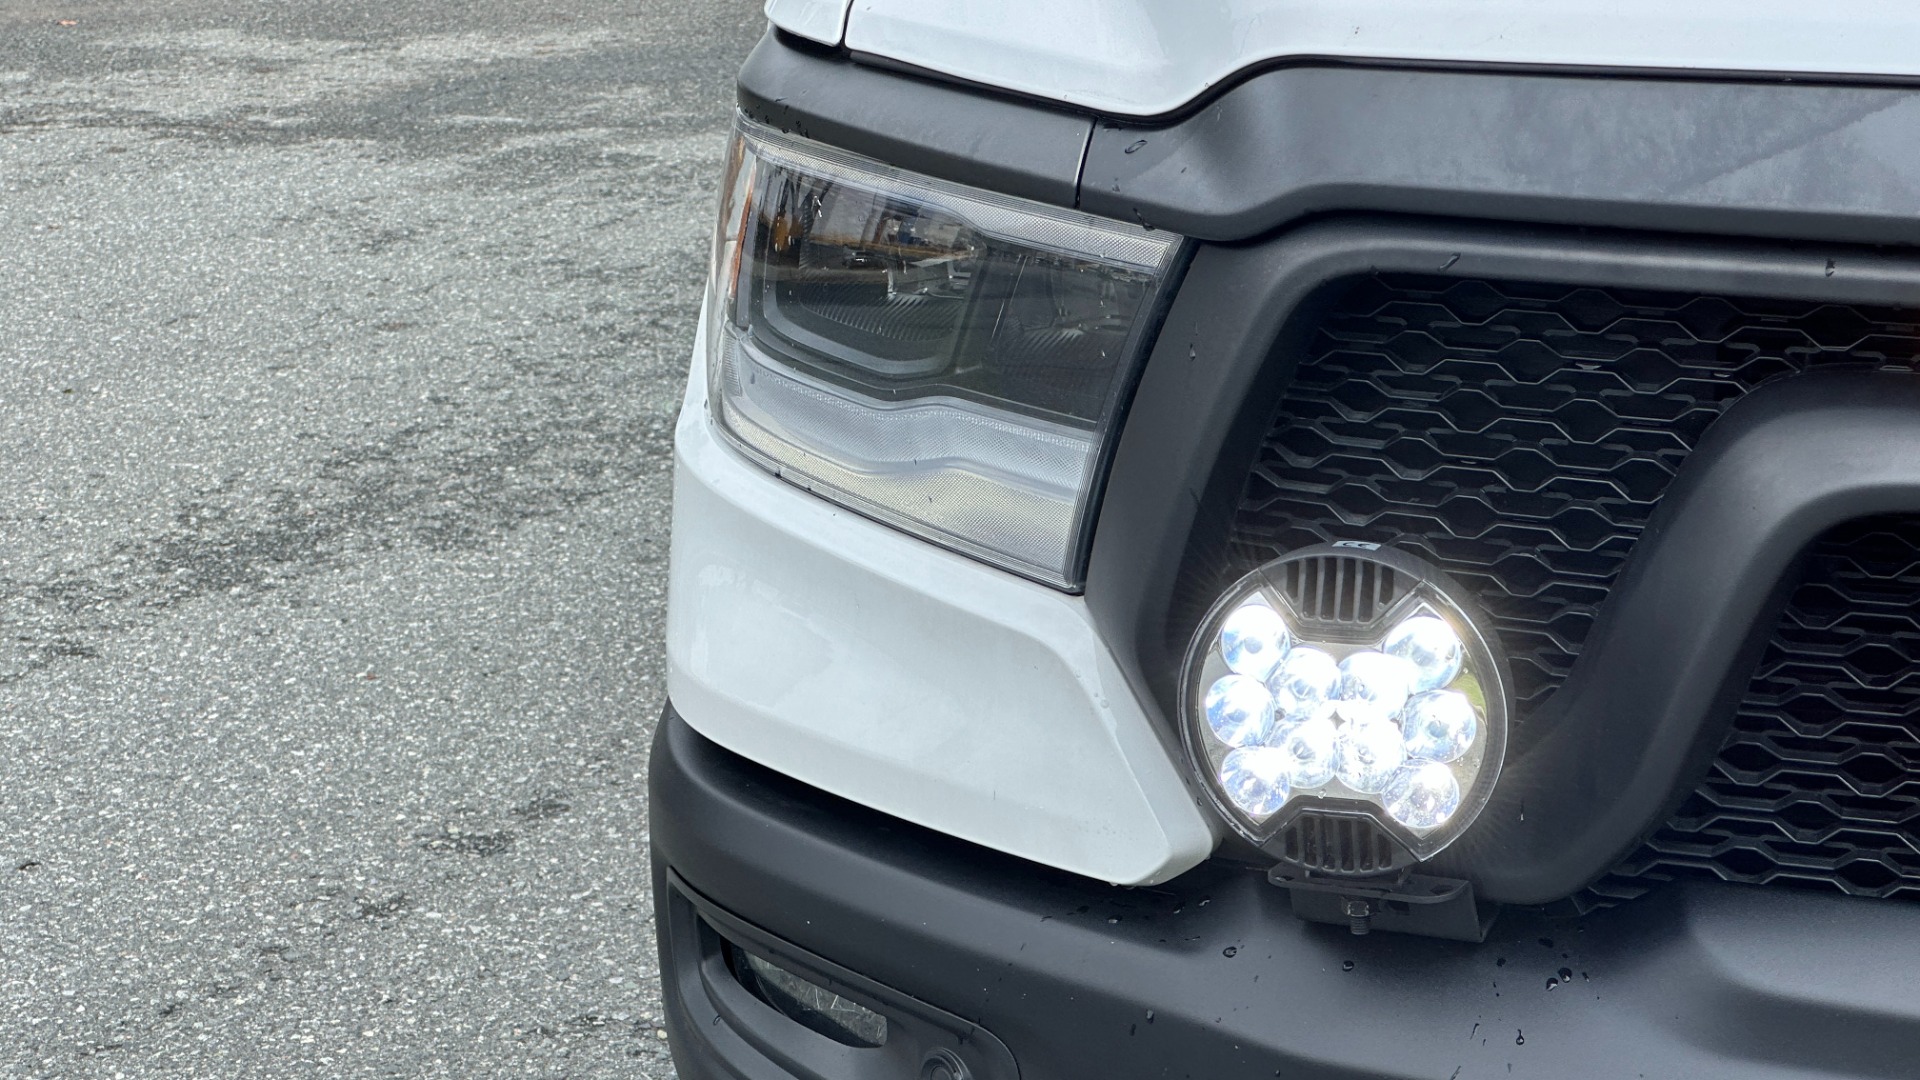 Used 2019 Ram 1500 REBEL / KC LIGHTS / BORLA EXHUAST / ALPINE / TOUCH SCREEN for sale $36,995 at Formula Imports in Charlotte NC 28227 42